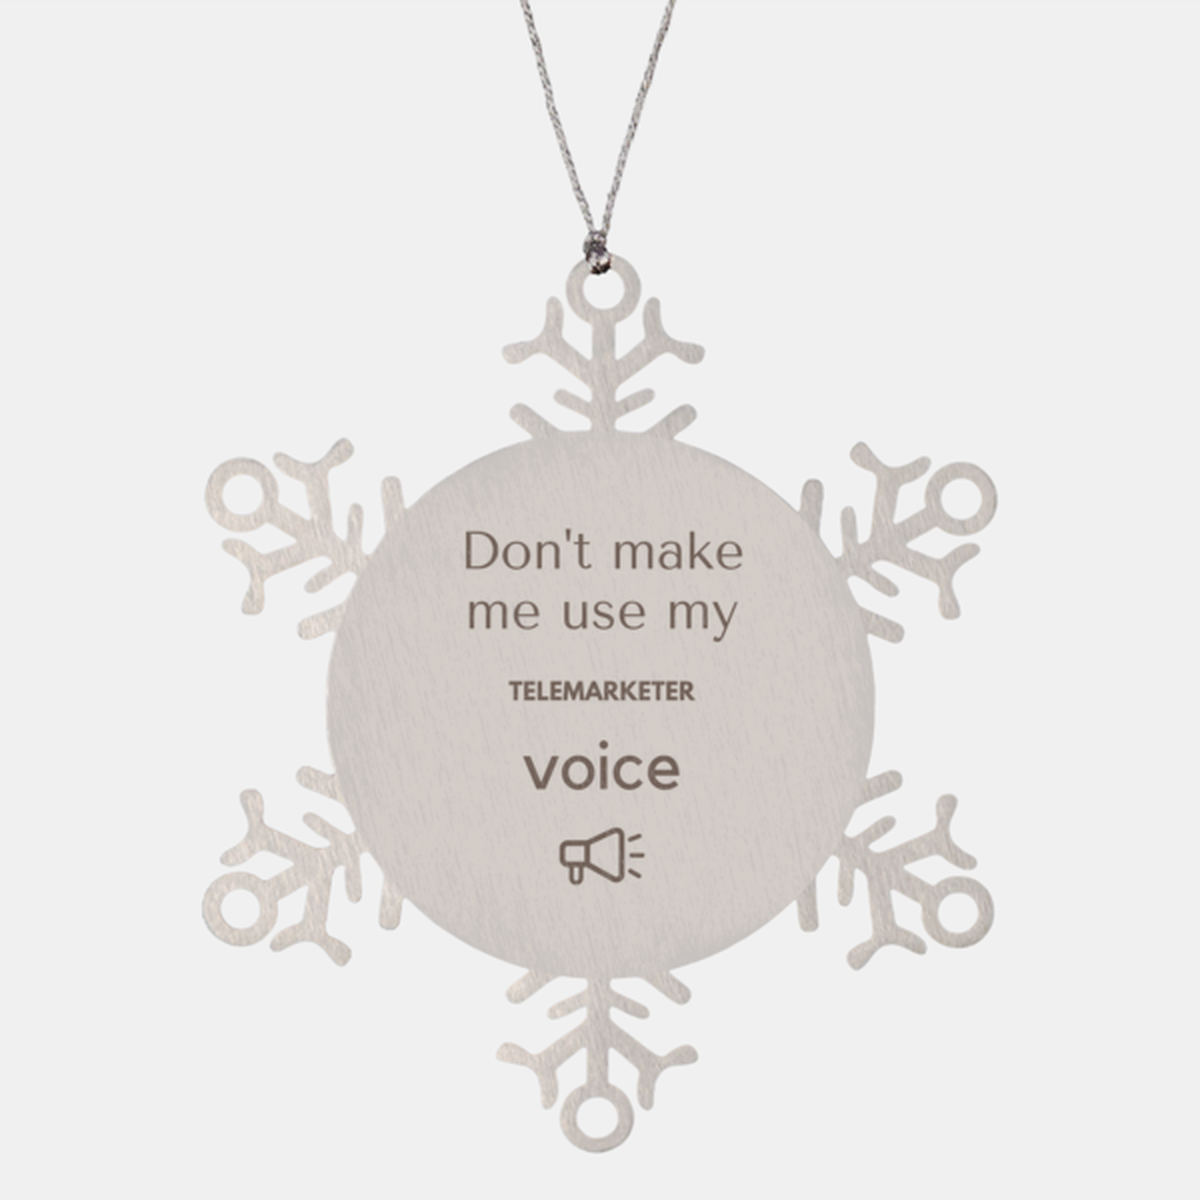 Don't make me use my Telemarketer voice, Sarcasm Telemarketer Ornament Gifts, Christmas Telemarketer Snowflake Ornament Unique Gifts For Telemarketer Coworkers, Men, Women, Colleague, Friends